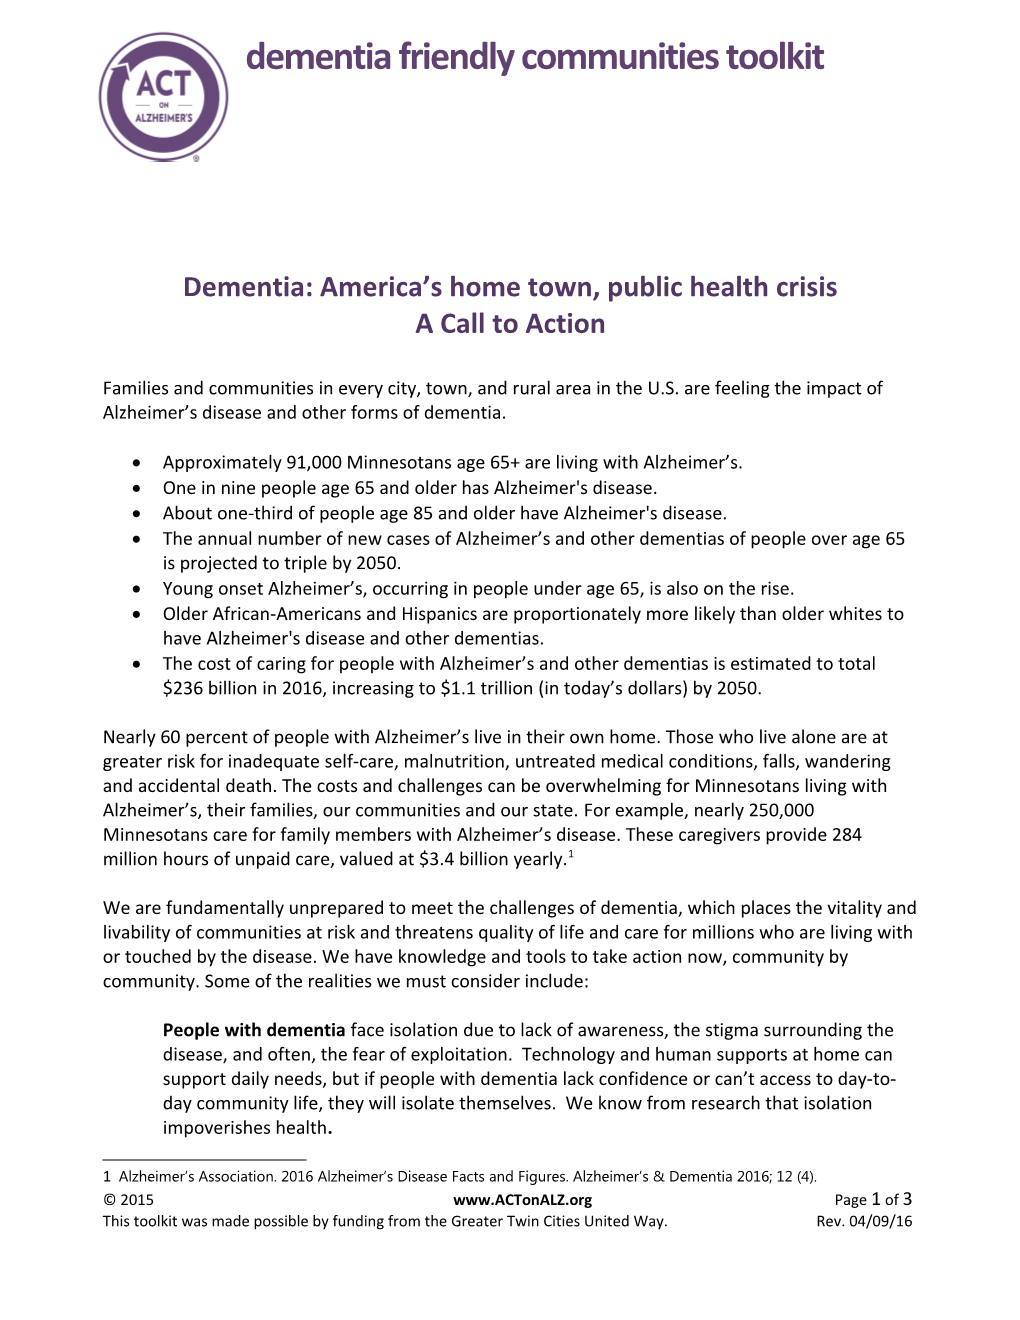 Dementia: America S Home Town, Public Health Crisis a Call to Action